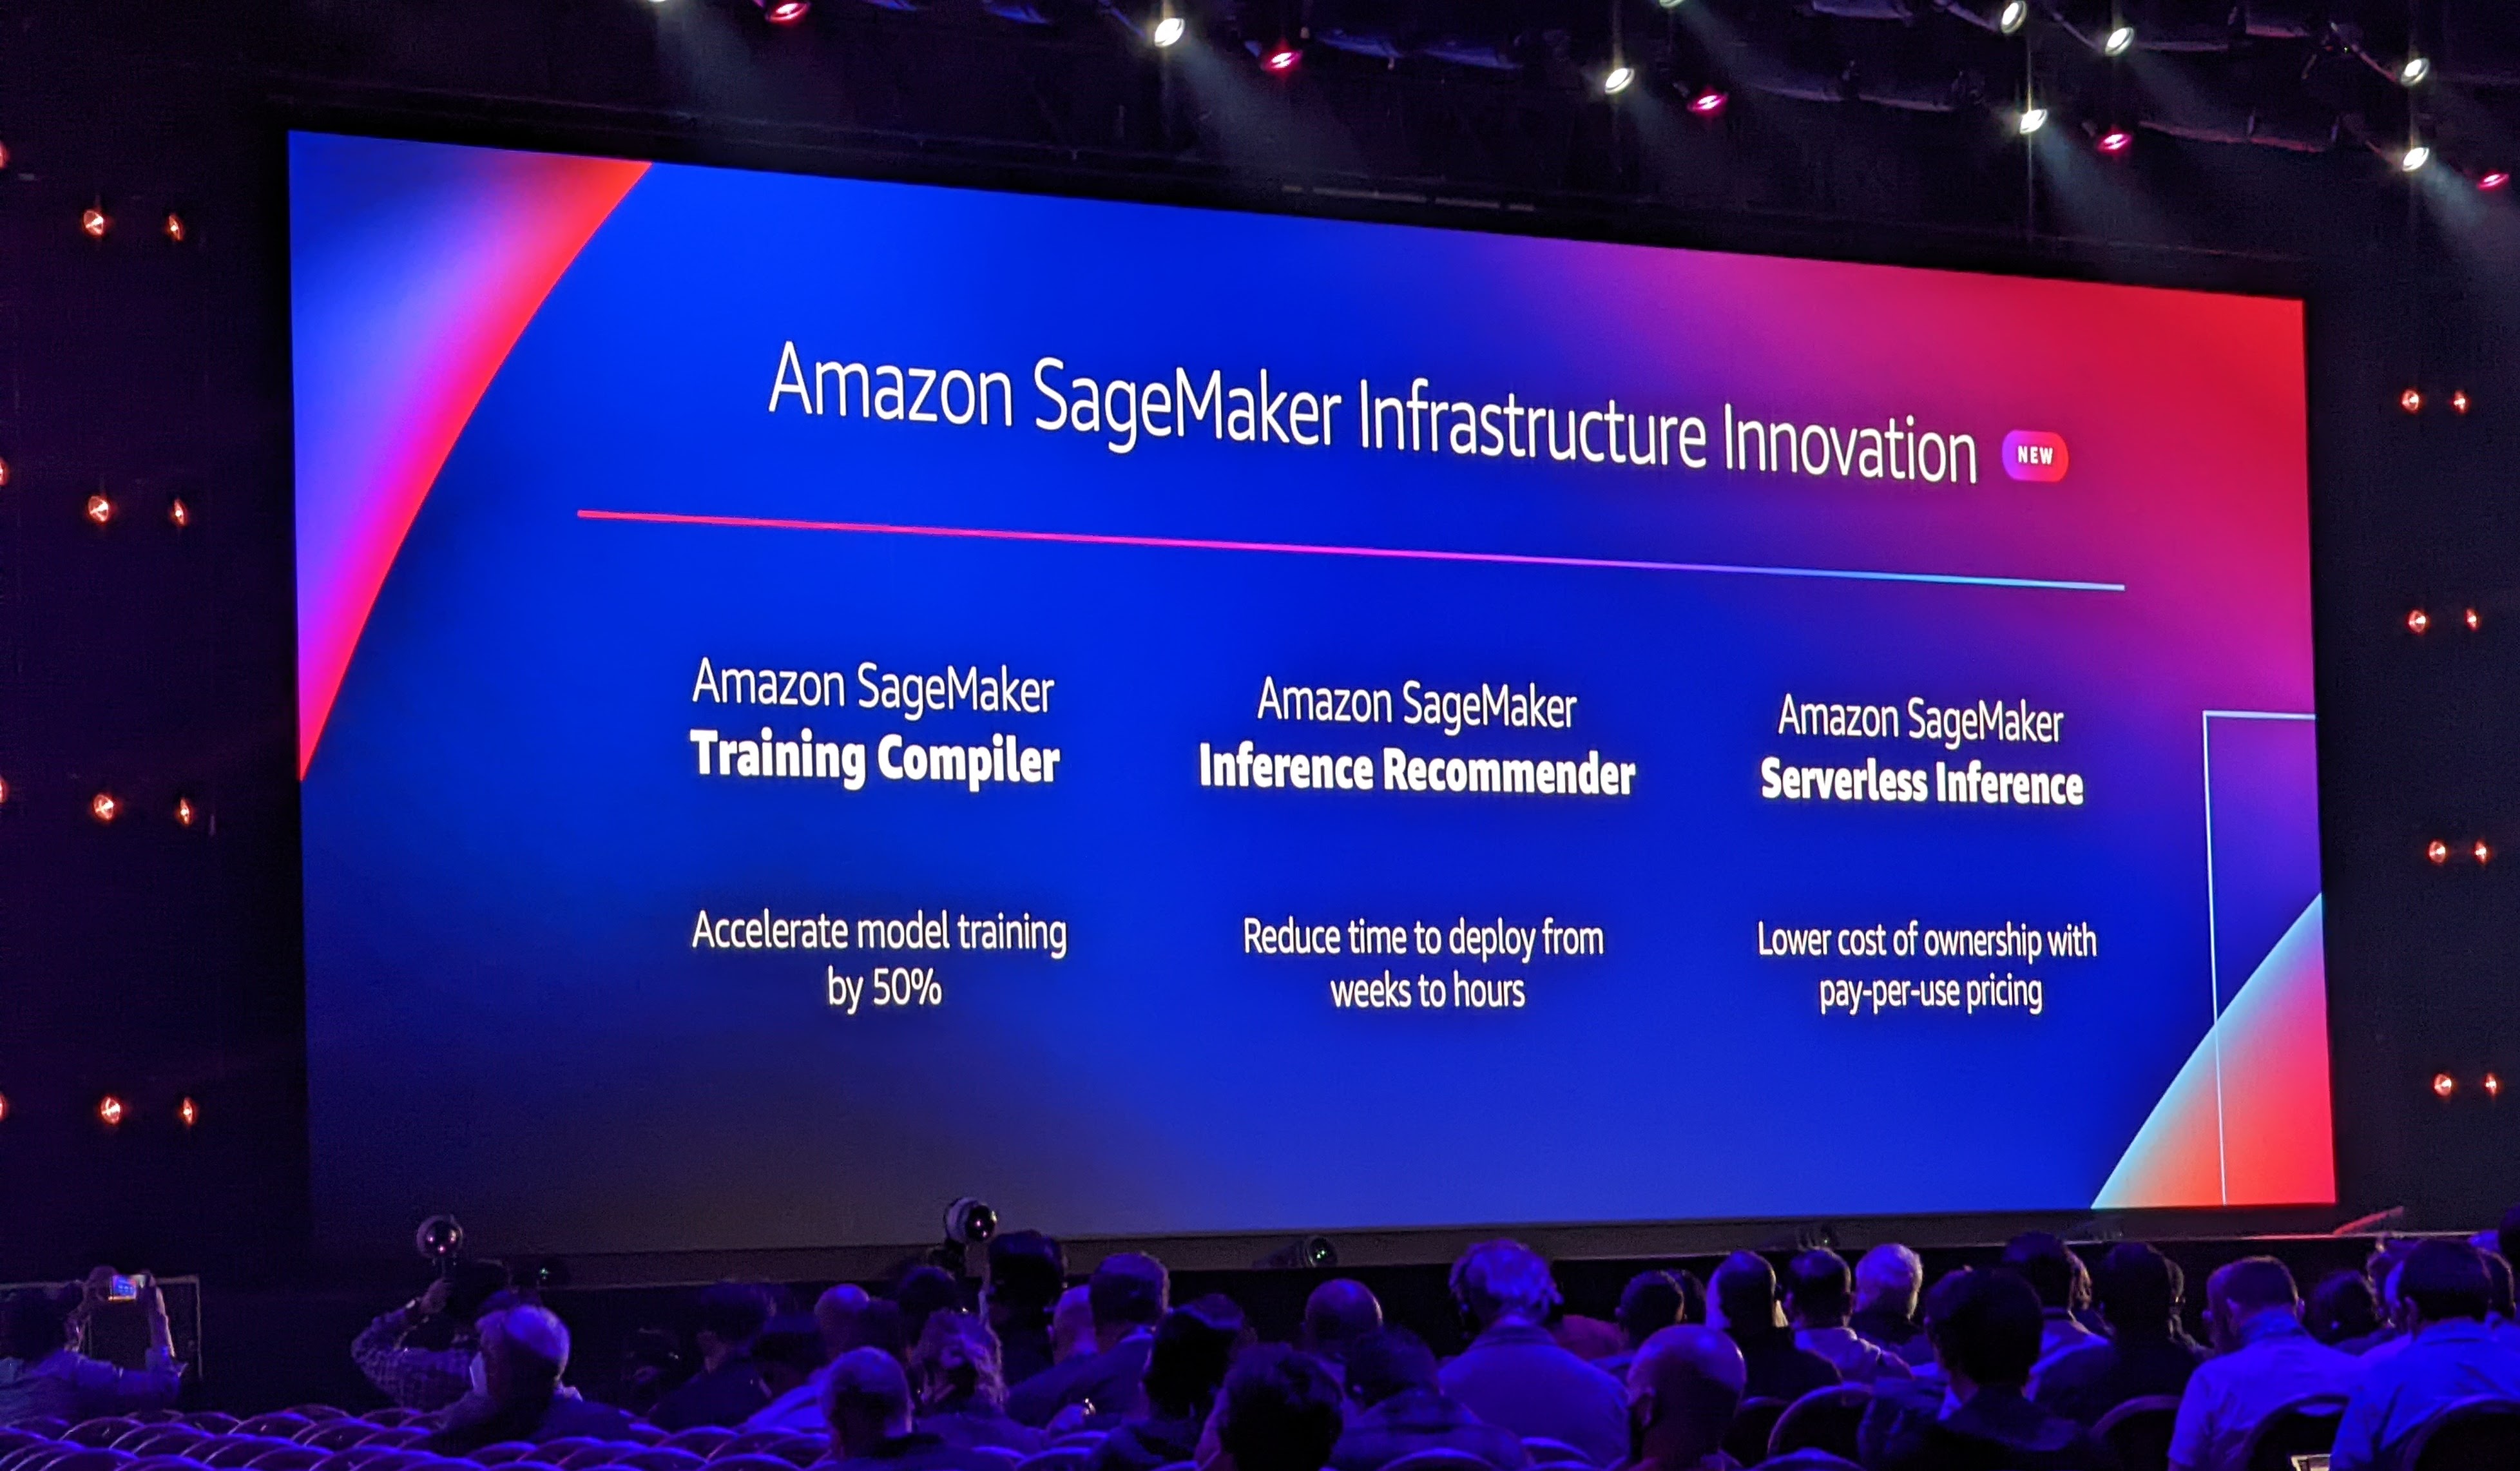 AWS launches new SageMaker features to help scale machine learning – TechCrunch